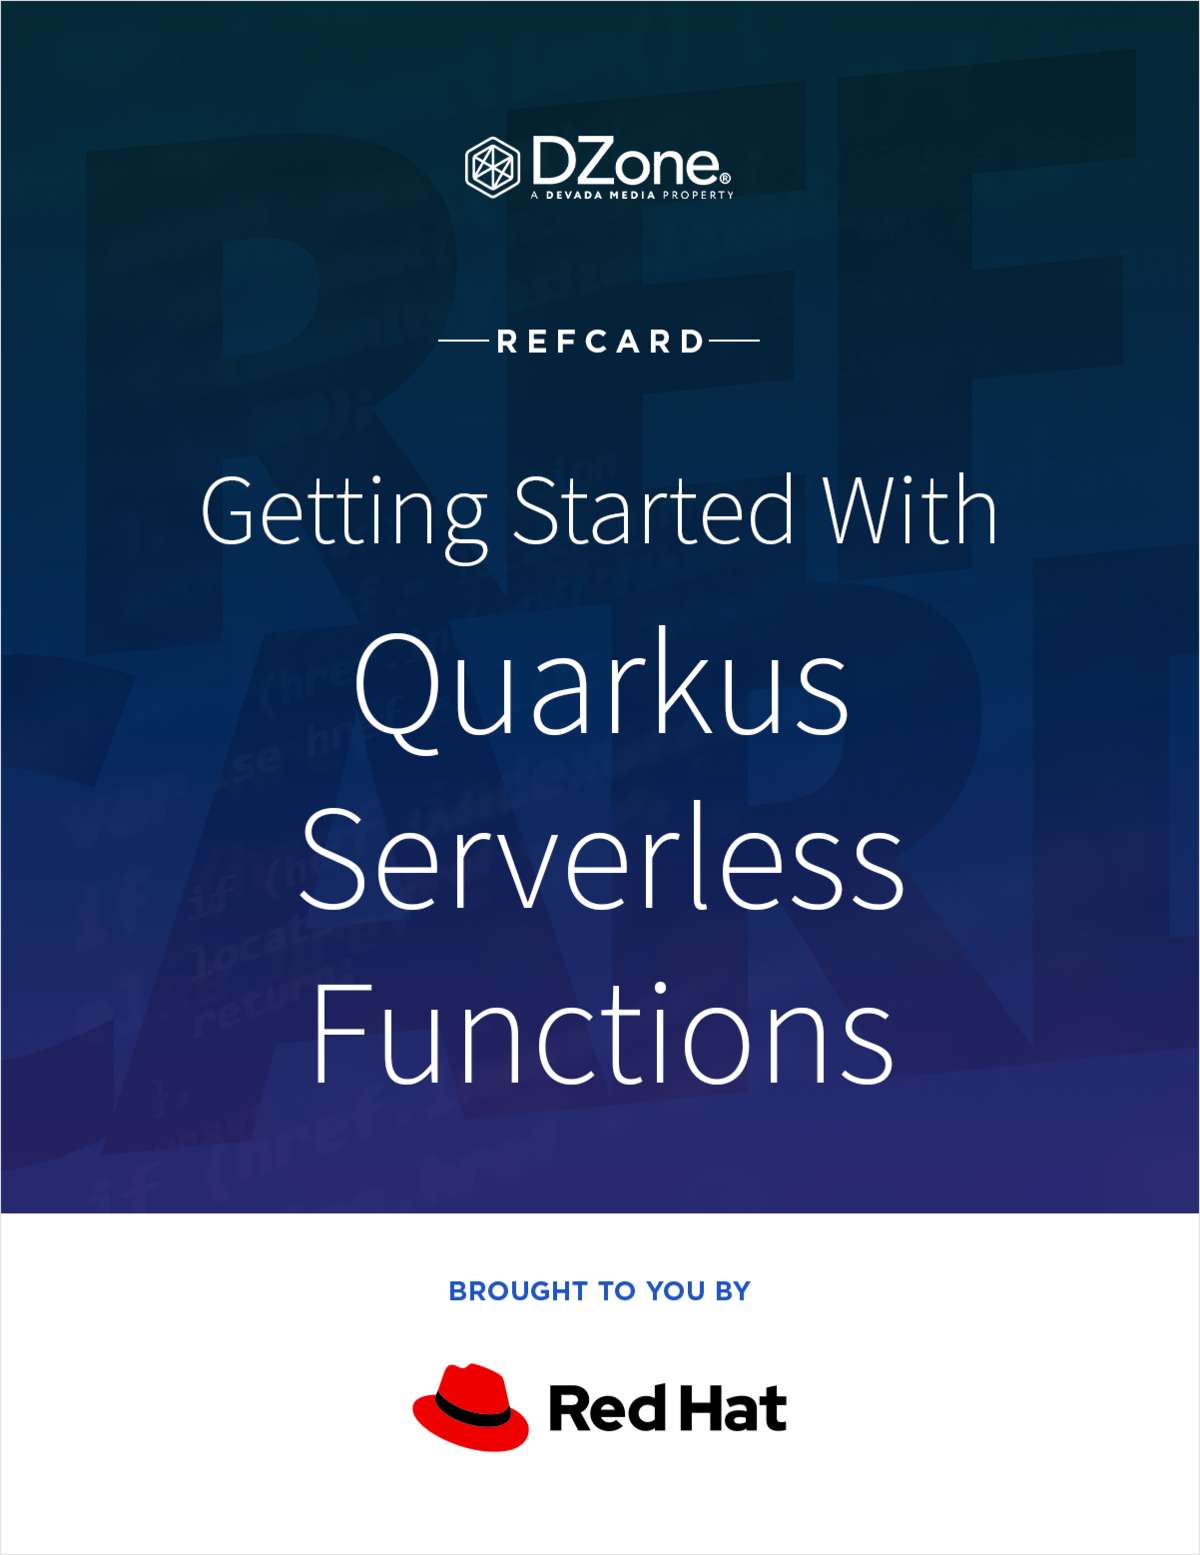 Getting Started With Quarkus Serverless Functions